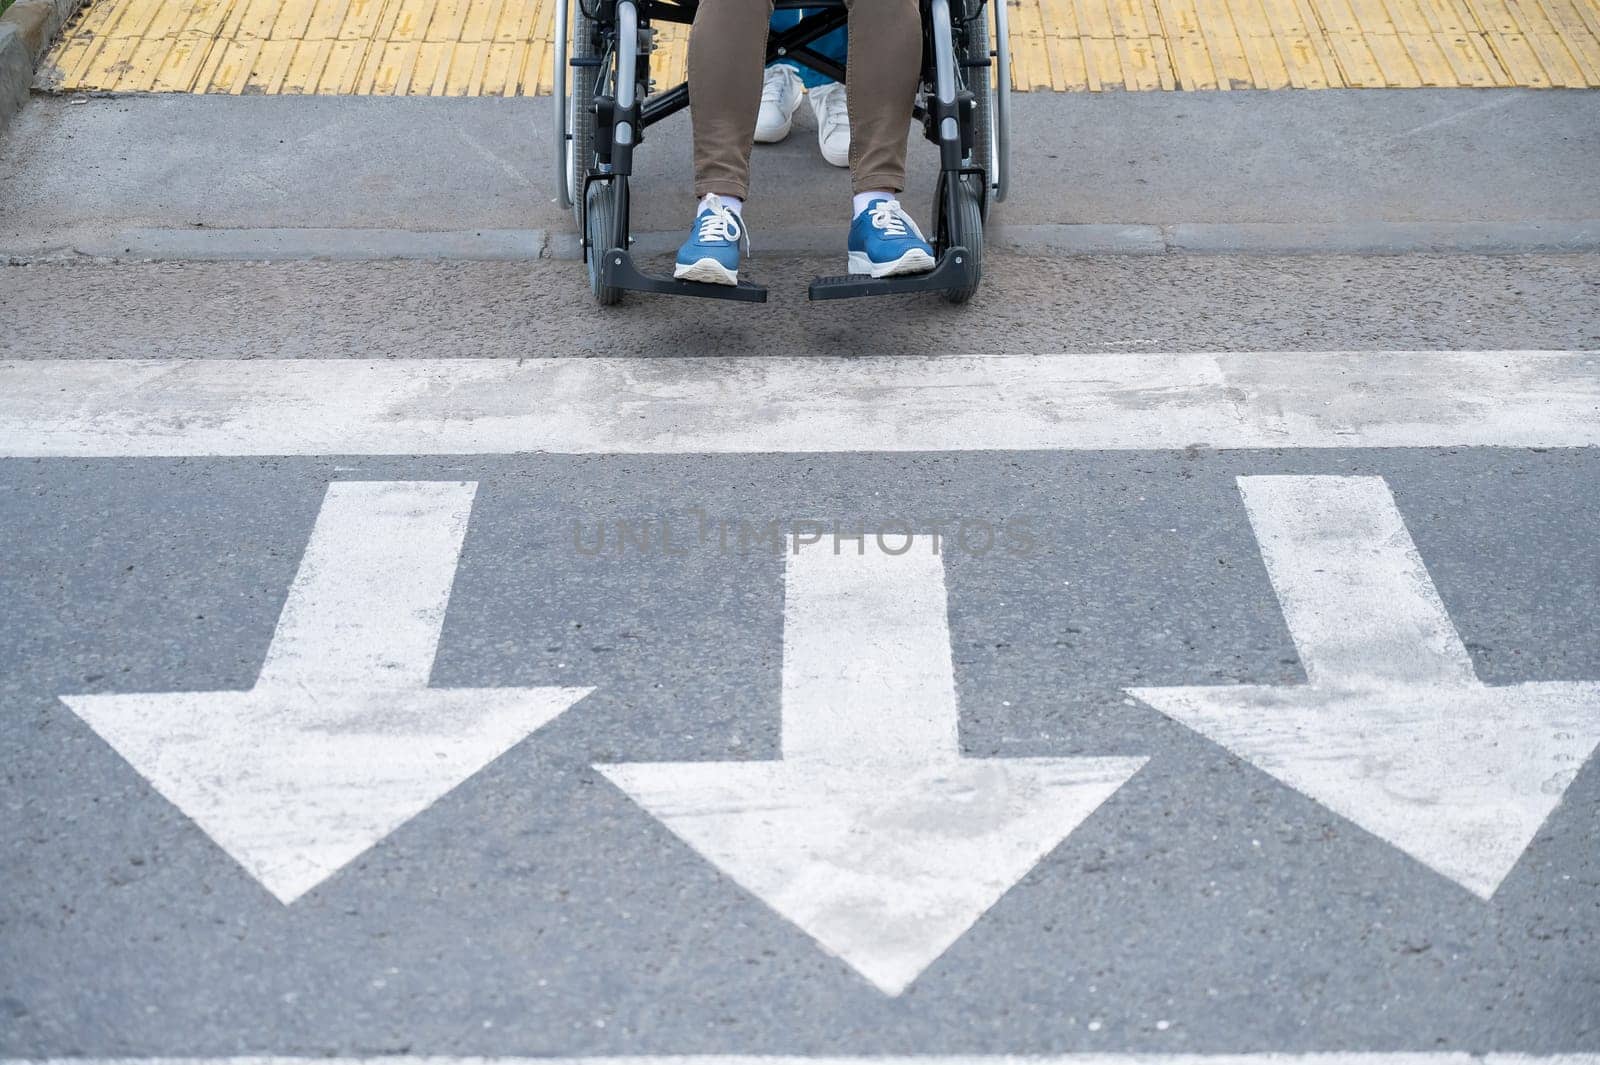 An elderly woman in a wheelchair is about to cross the road at a pedestrian crossing. by mrwed54